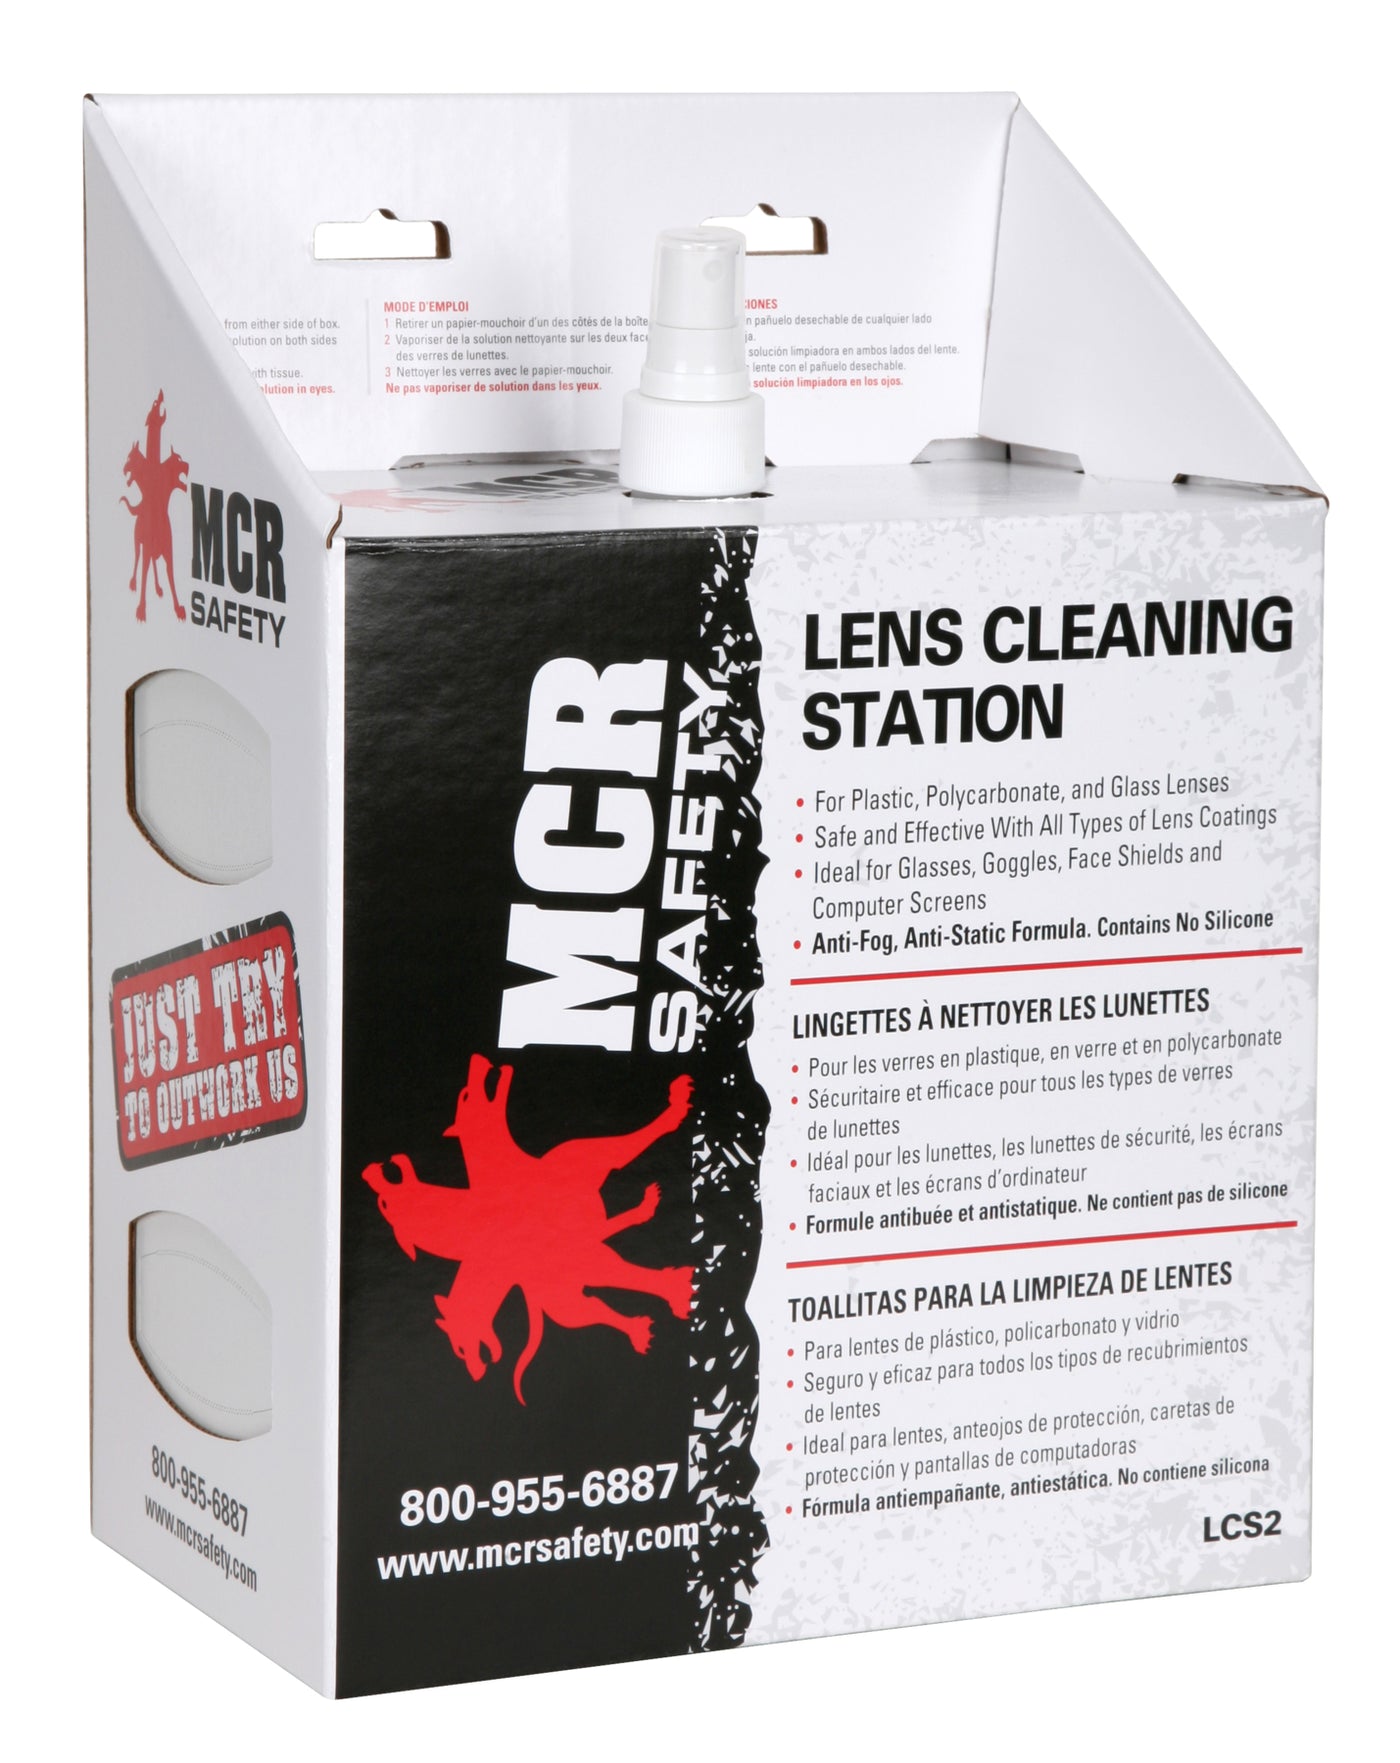 LCS2 - Lens Cleaning station